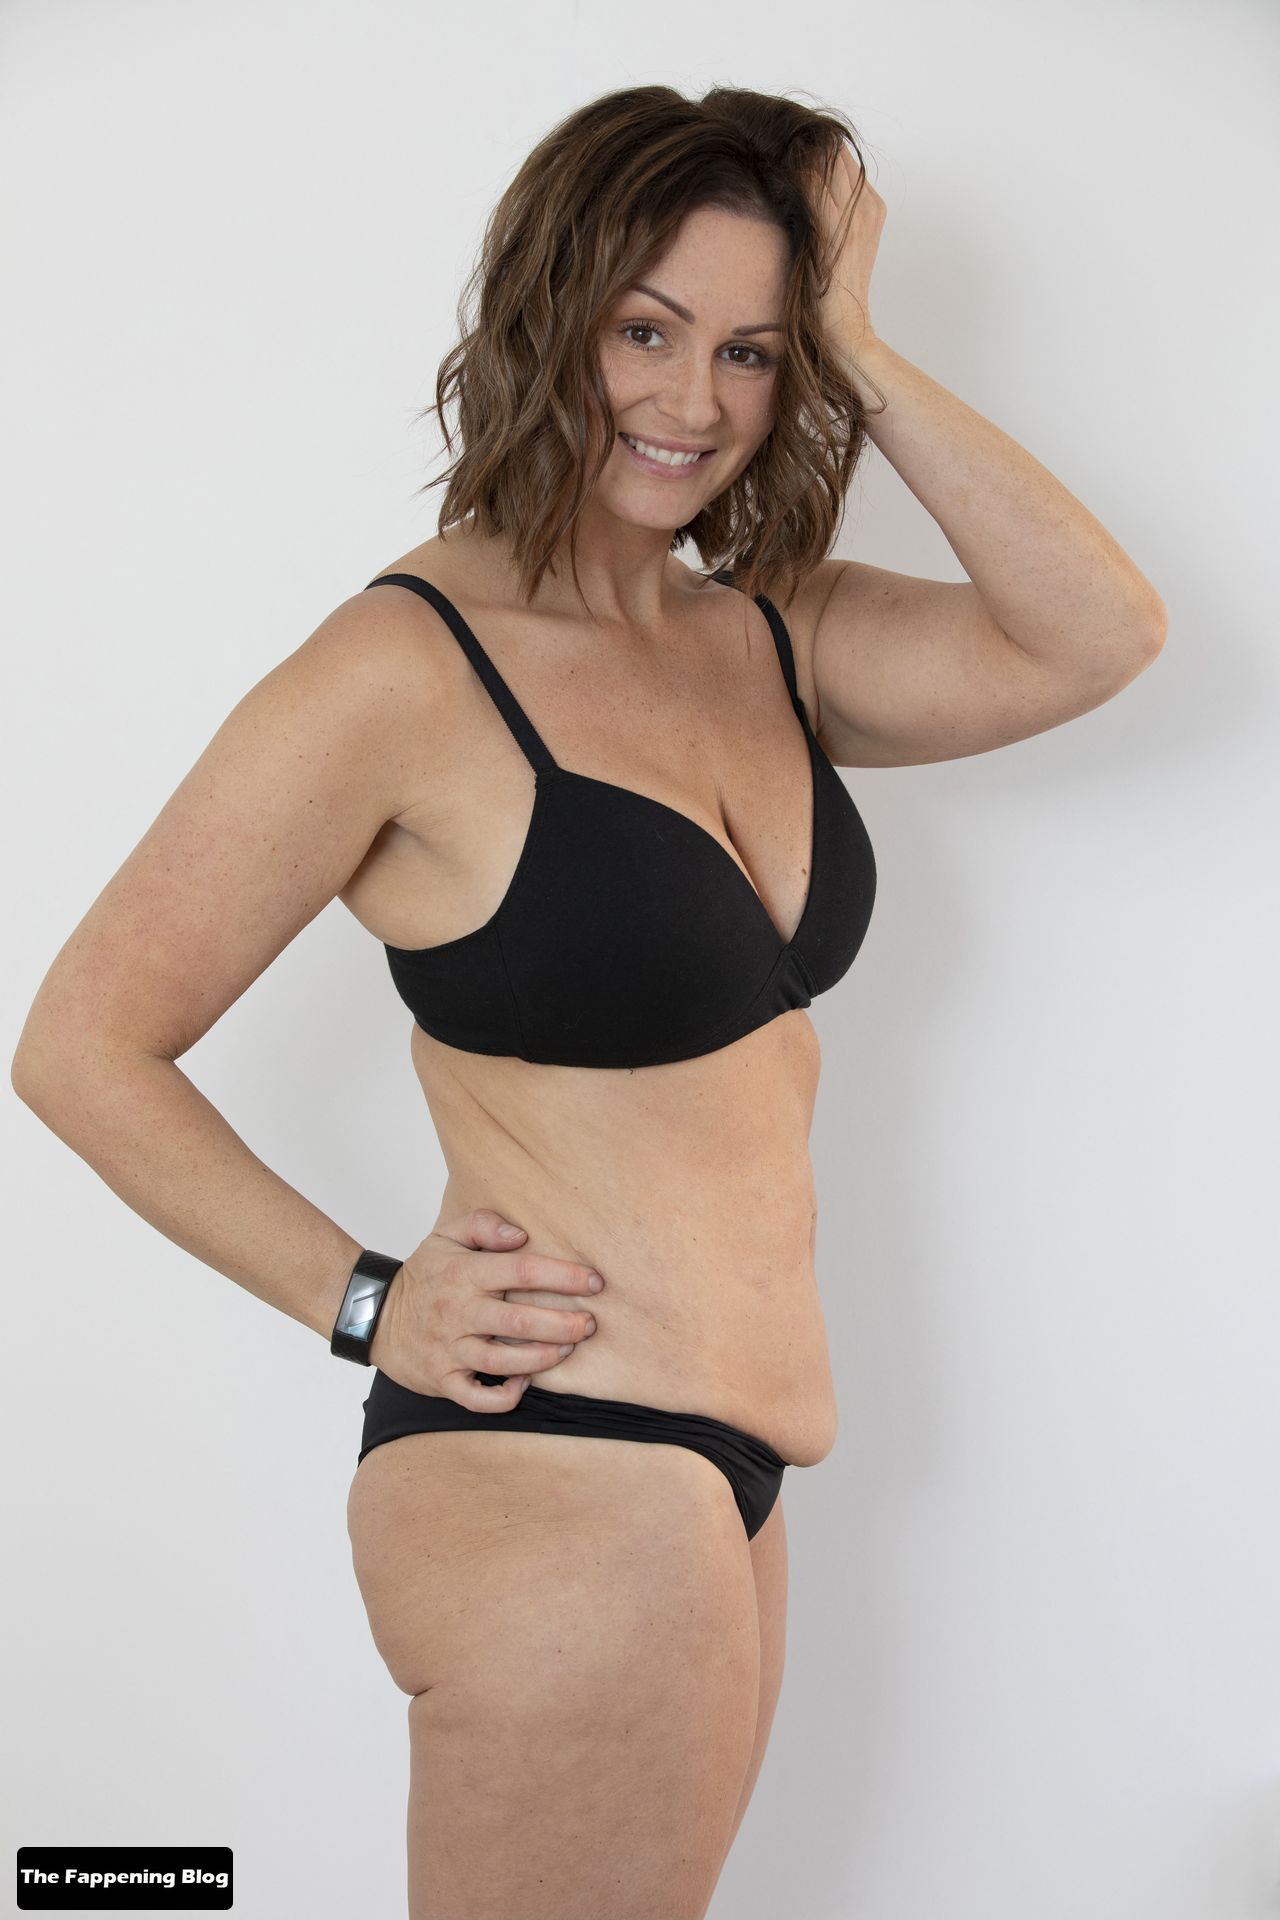 Chanelle-Hayes-Sexy-The-Fappening-Blog-13.jpg